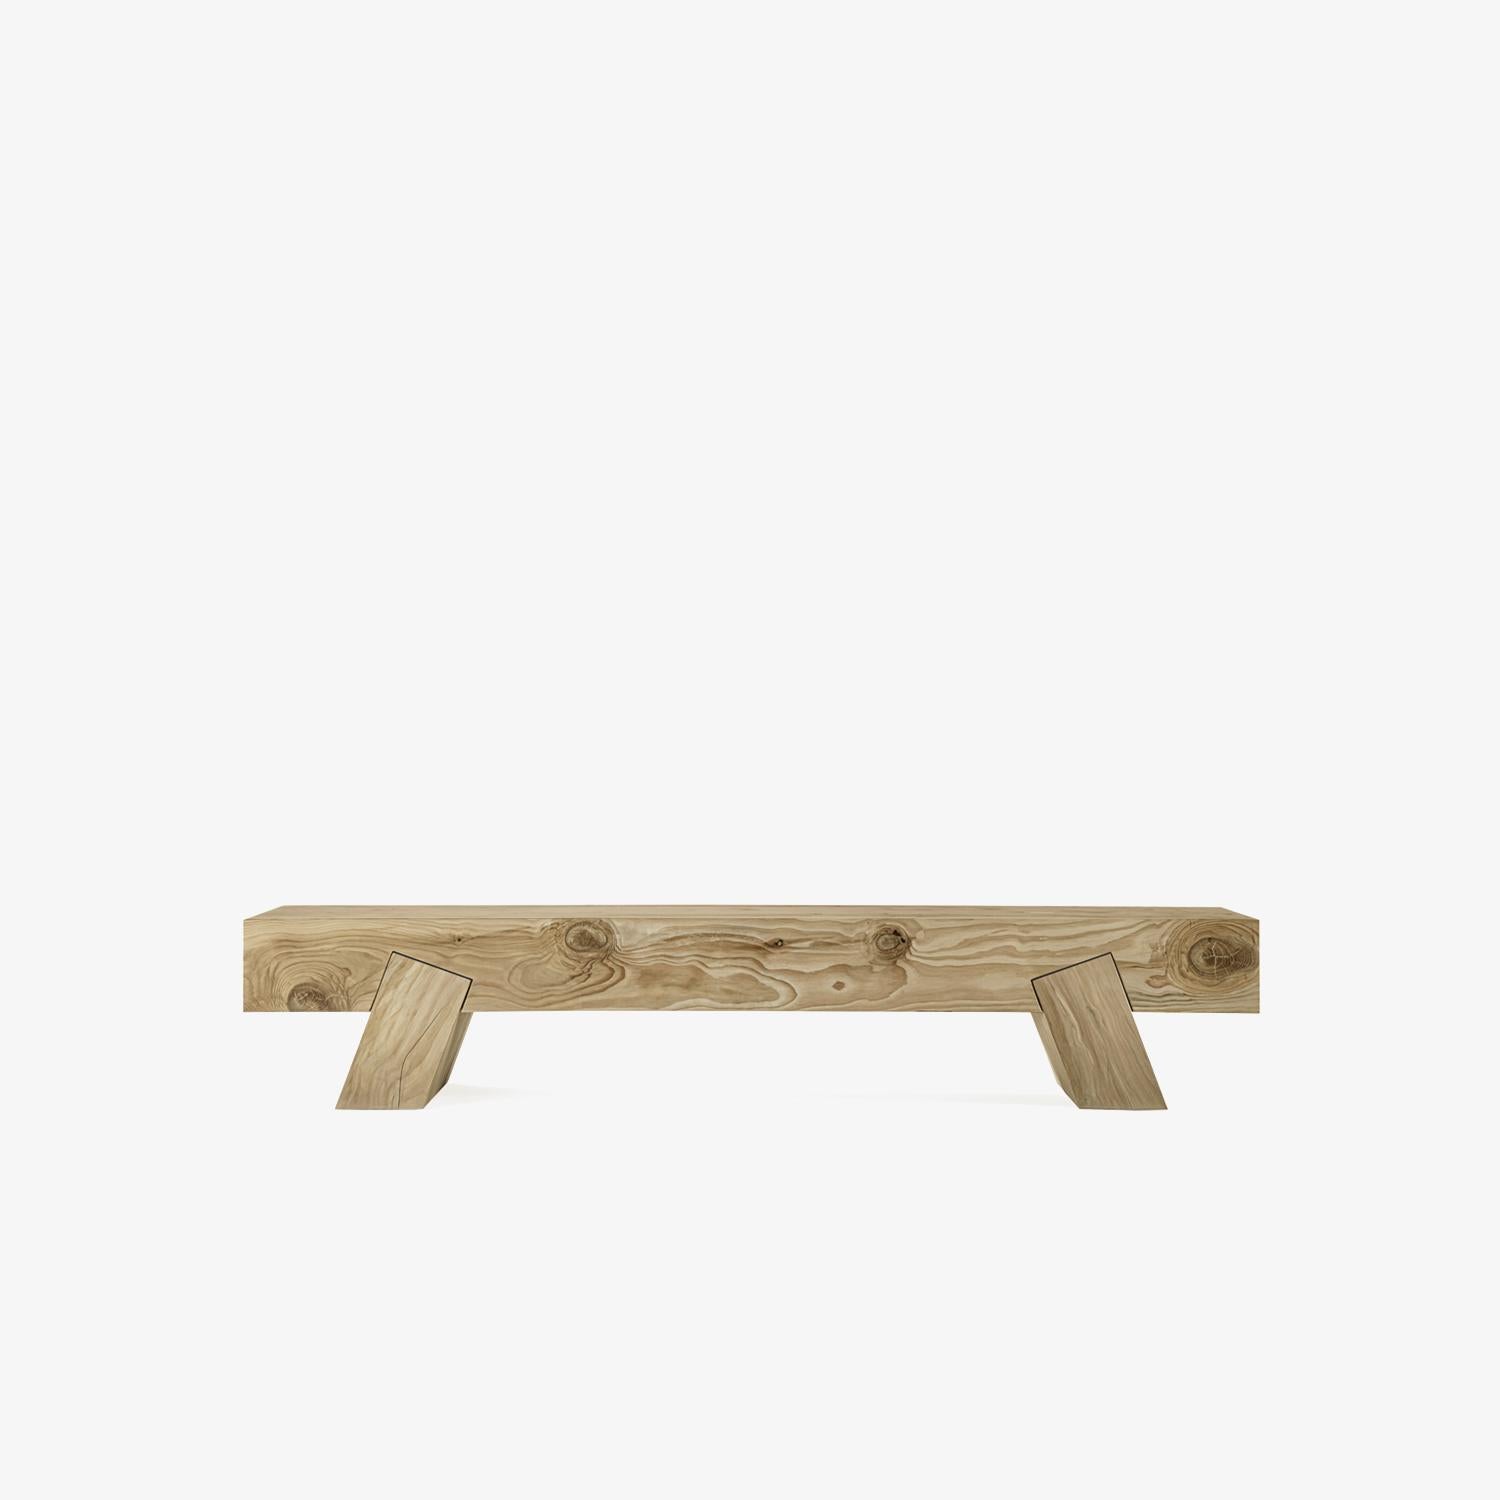 Italian Outdoor Bench Crafted From Solid Block of Scented Cedar Wood For Sale